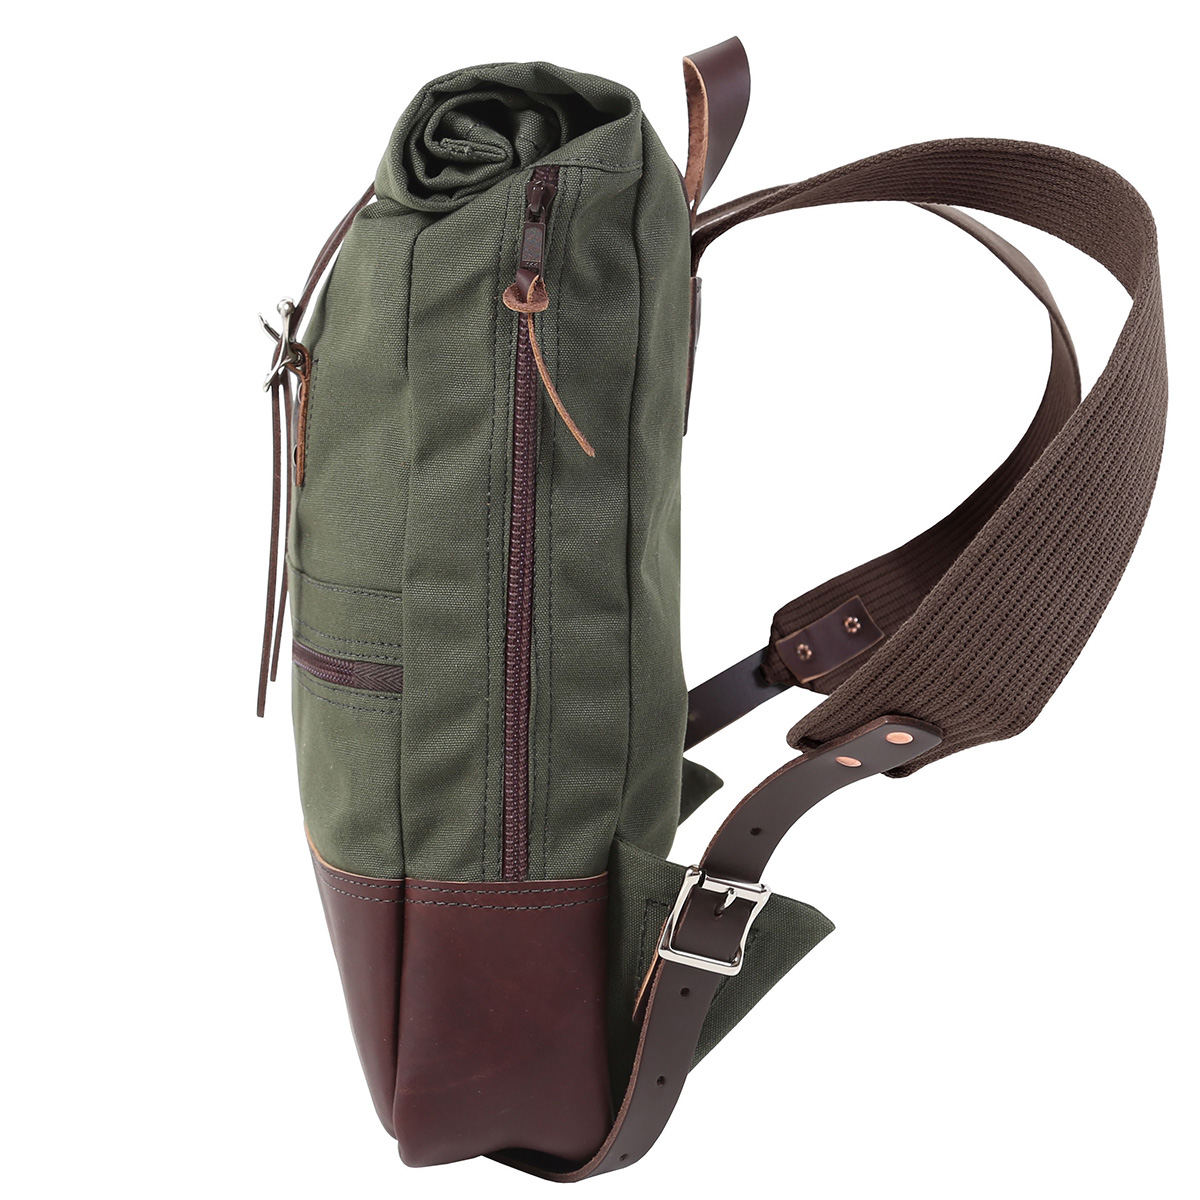 DULUTH PACK DULUTH MINN Deluxe Roll Top Scout Olive Drab Pack (B-1408-OD) - image 2 of 5